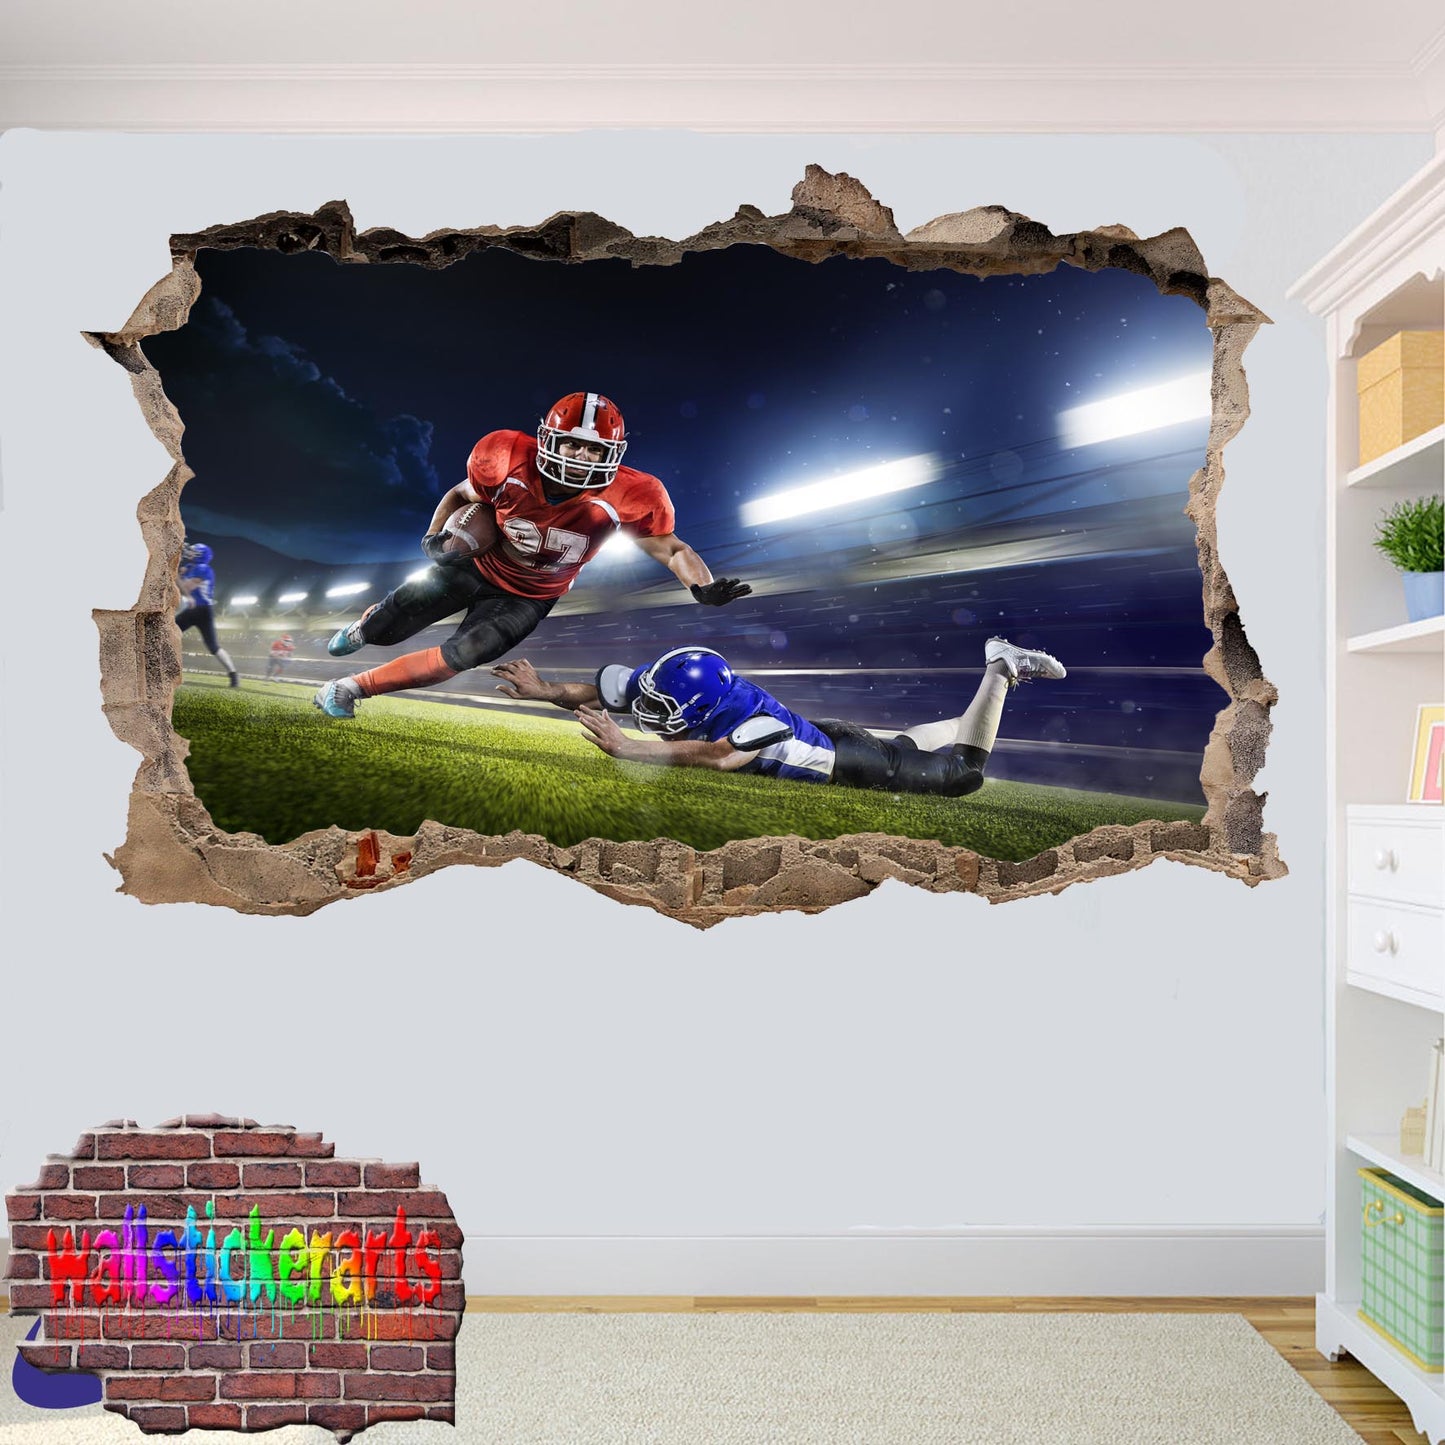 American Football Players Players On Pitch Sports 3d Smashed Effect Wall Sticker Room Office Nursery Shop Decoration Decal Mural YQ6